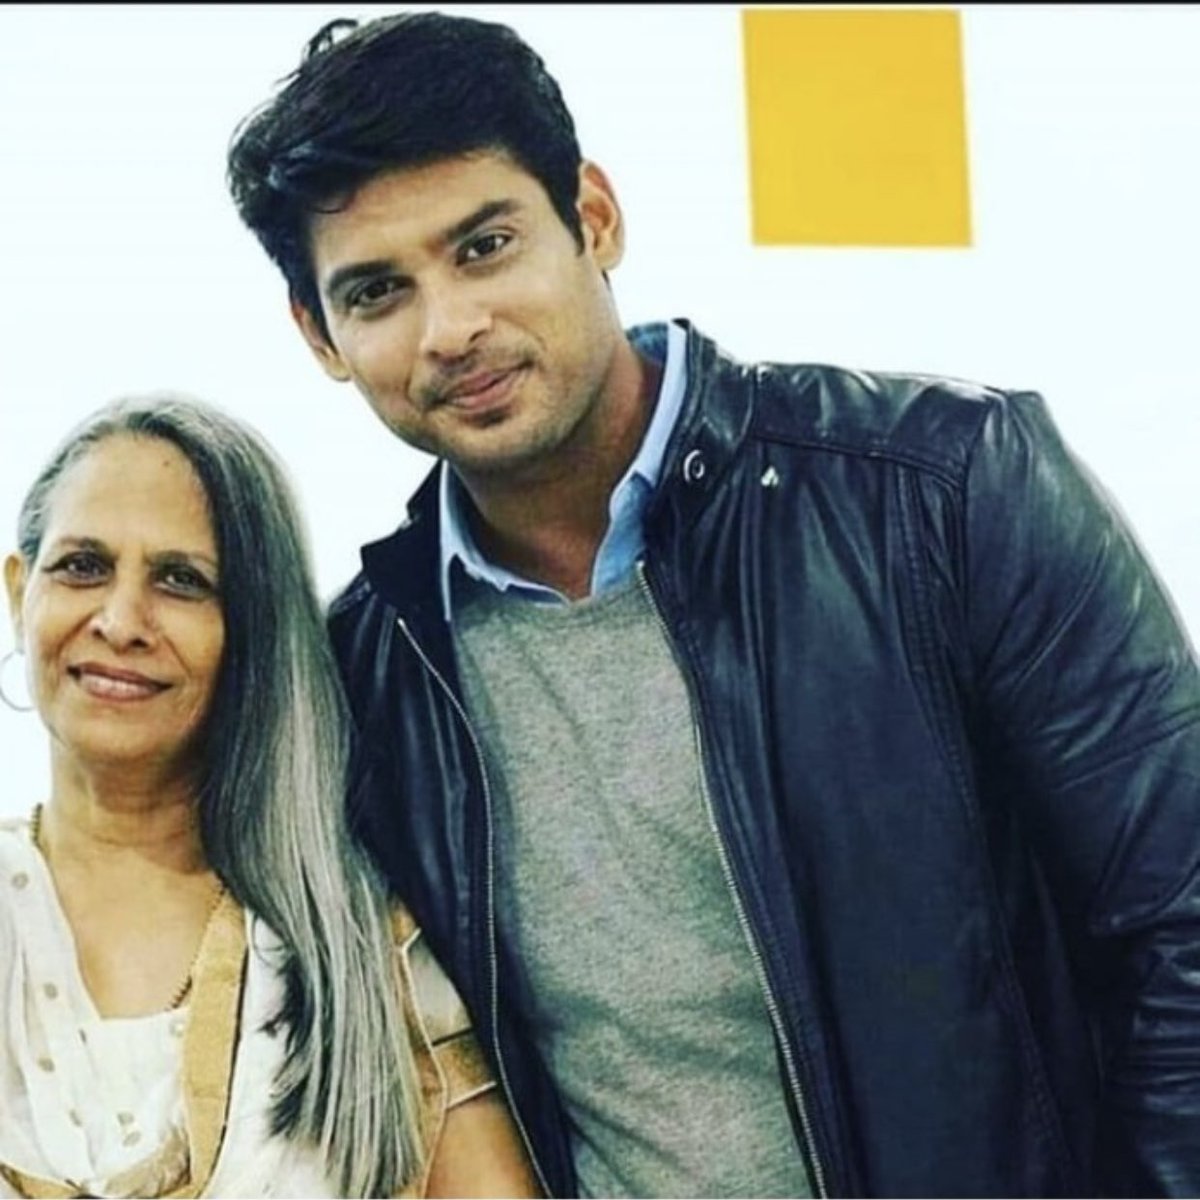 There ought to be a hall of fame for mamas. Creation's most unique and precious pearls. And heaven help us always to remember that the hand that rocks the cradle rules the world. #SidharthShukla